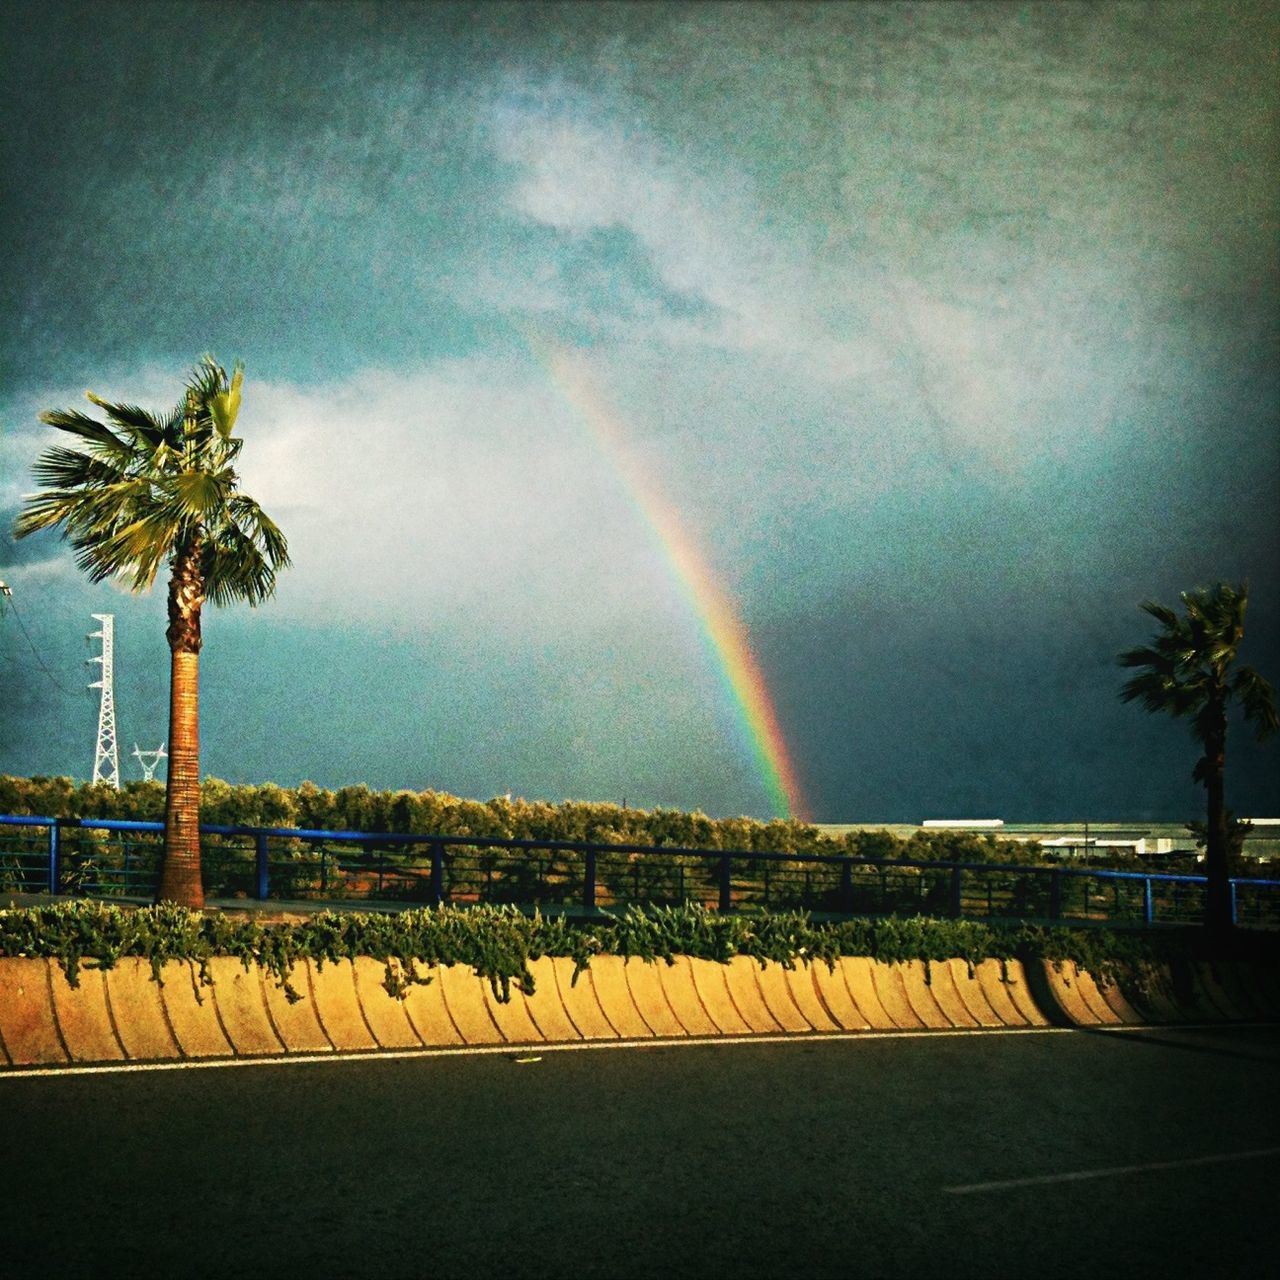 palm tree, sky, tree, rainbow, cloud - sky, road, multi colored, nature, scenics, beauty in nature, cloud, tranquility, cloudy, outdoors, street, tranquil scene, landscape, transportation, growth, no people